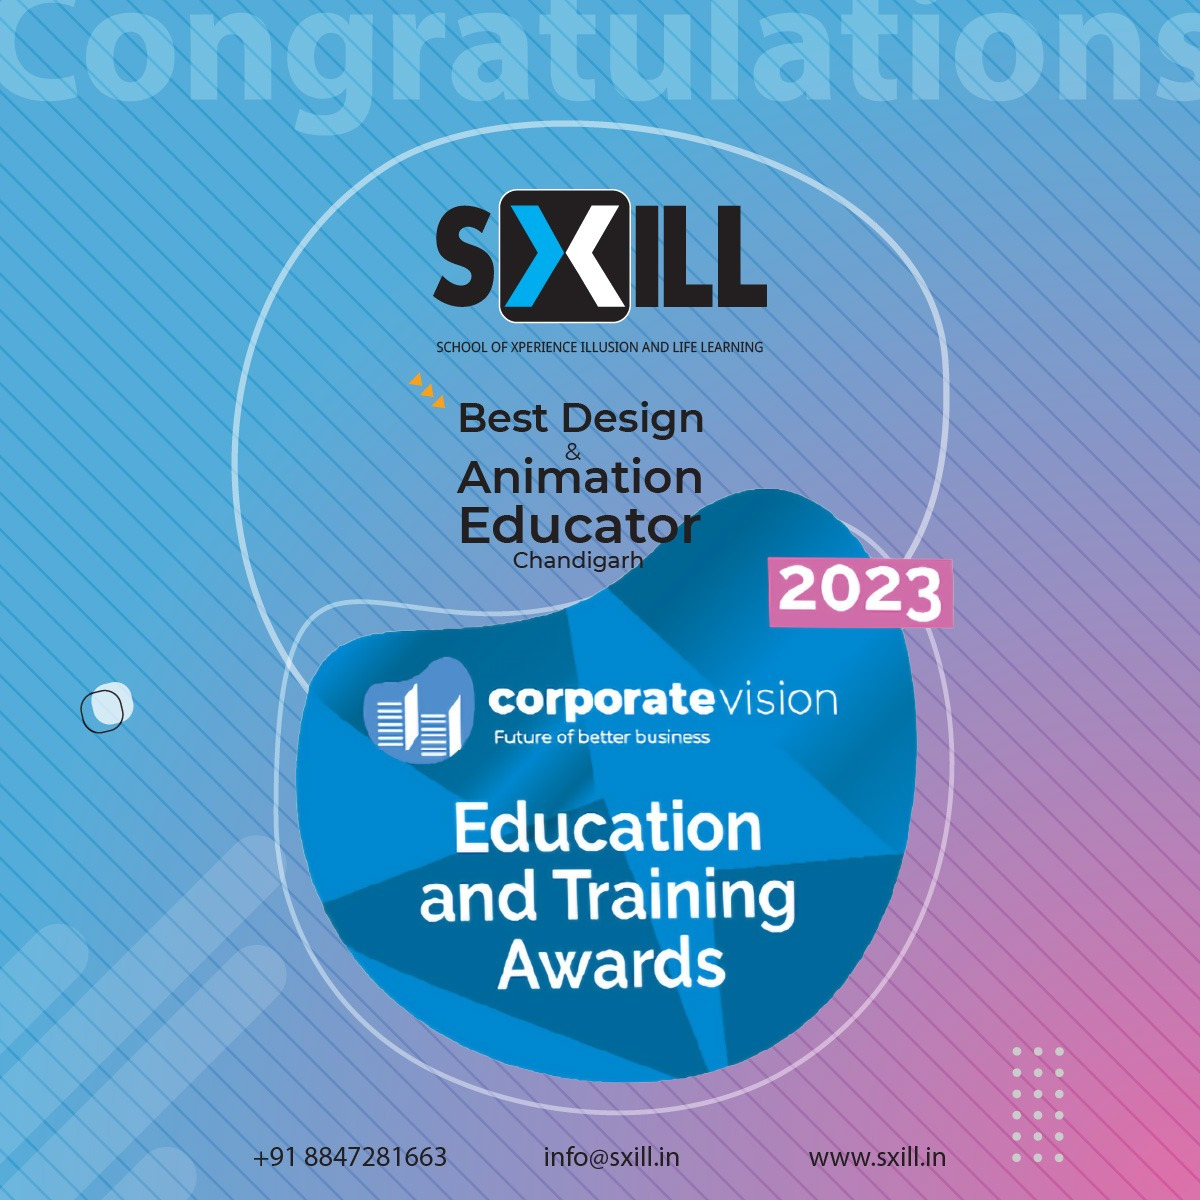 Chandigarh based Design Institute SXILL was Awarded for its ‘Best Design and Animation Educator - Chandigarh’